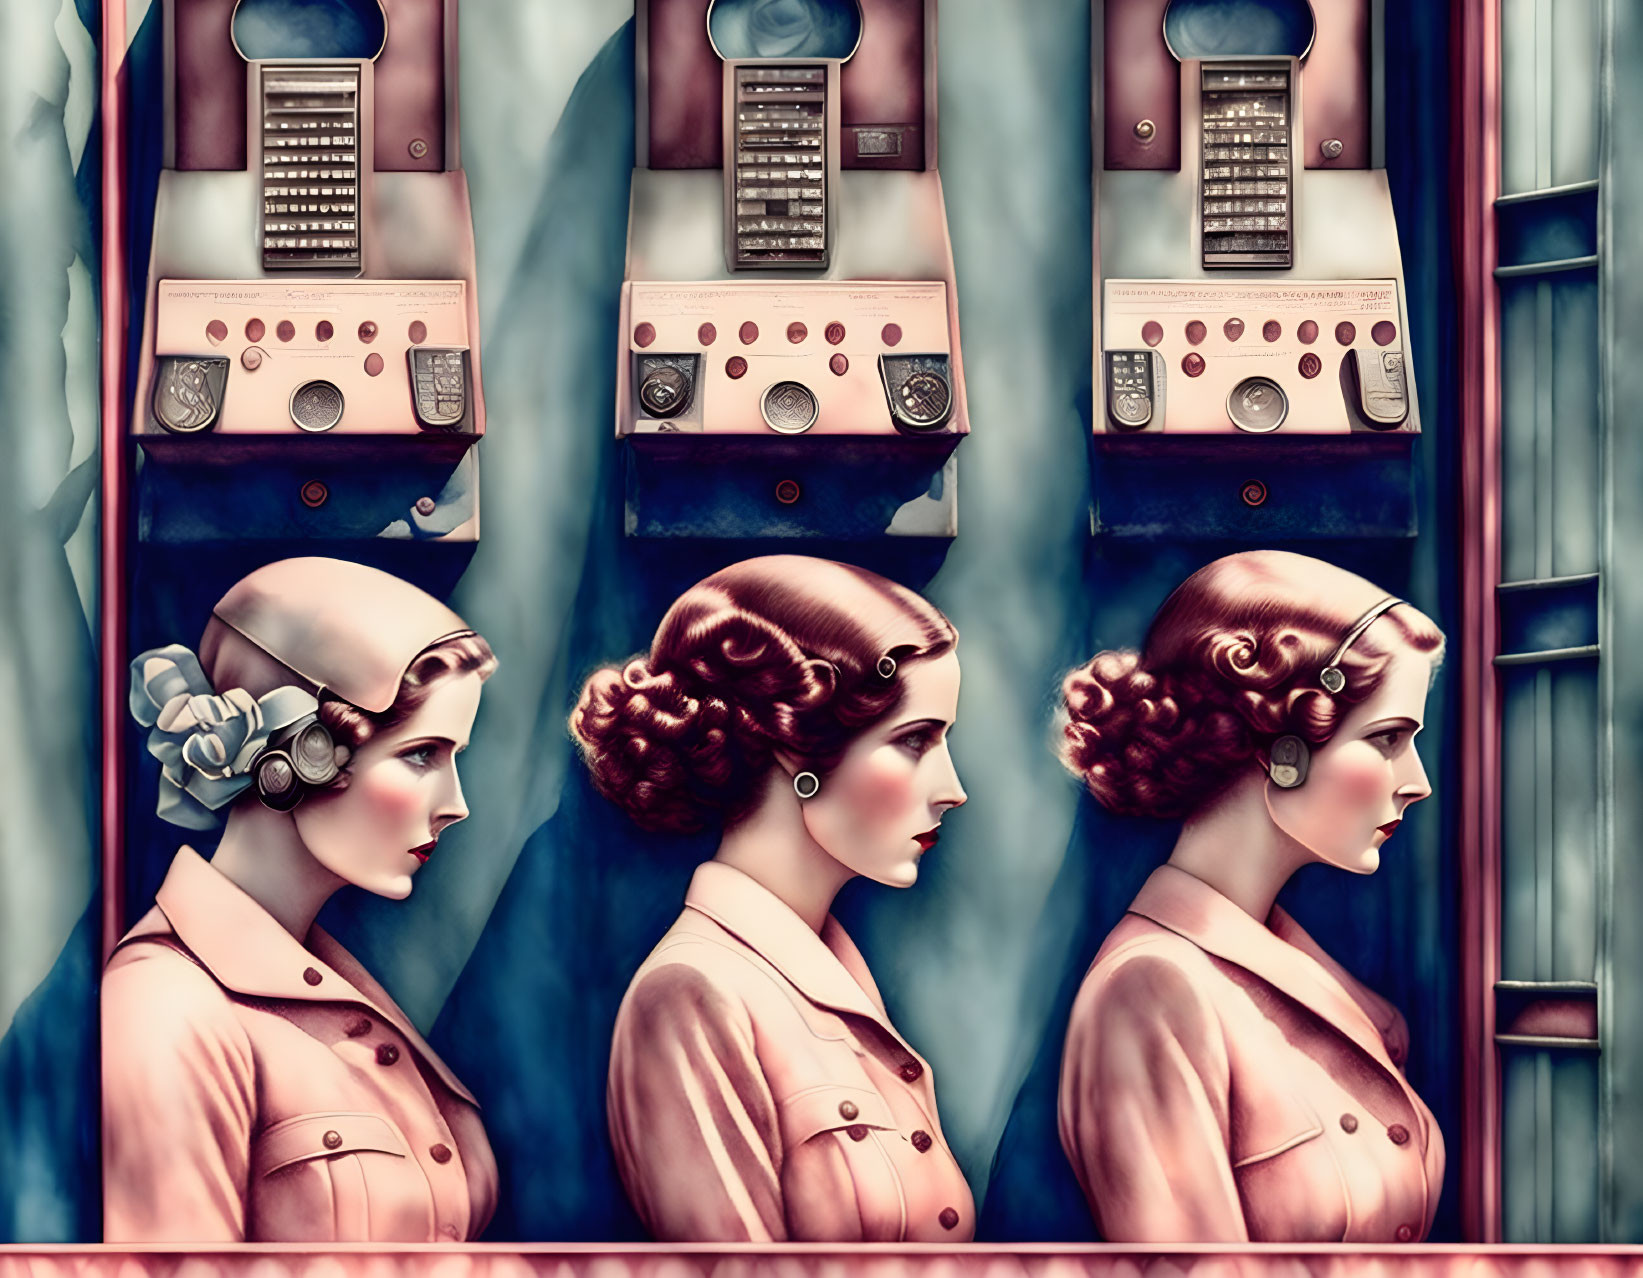 Women at the telephone exchange